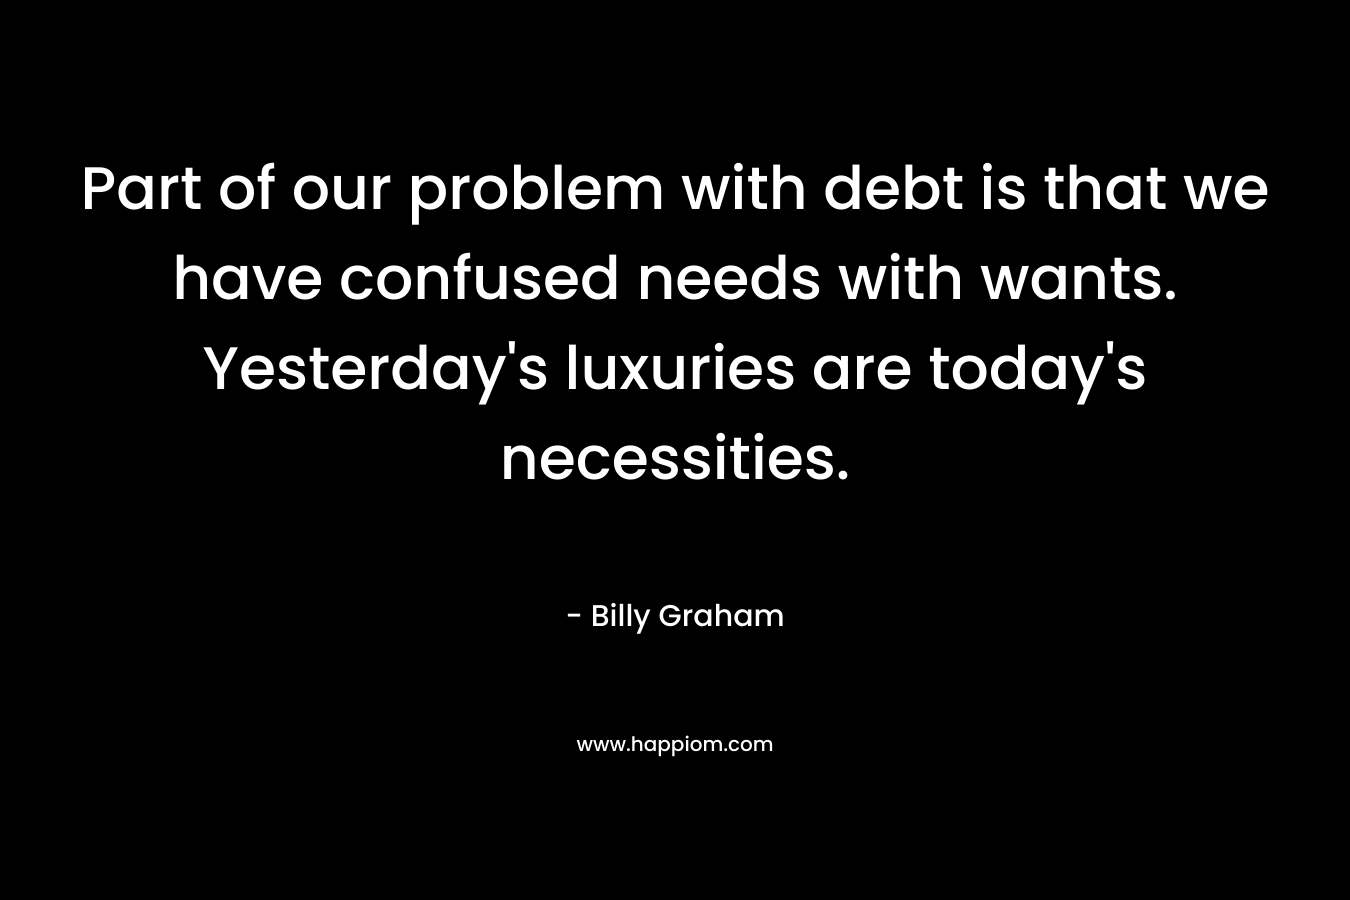 Part of our problem with debt is that we have confused needs with wants. Yesterday’s luxuries are today’s necessities. – Billy Graham